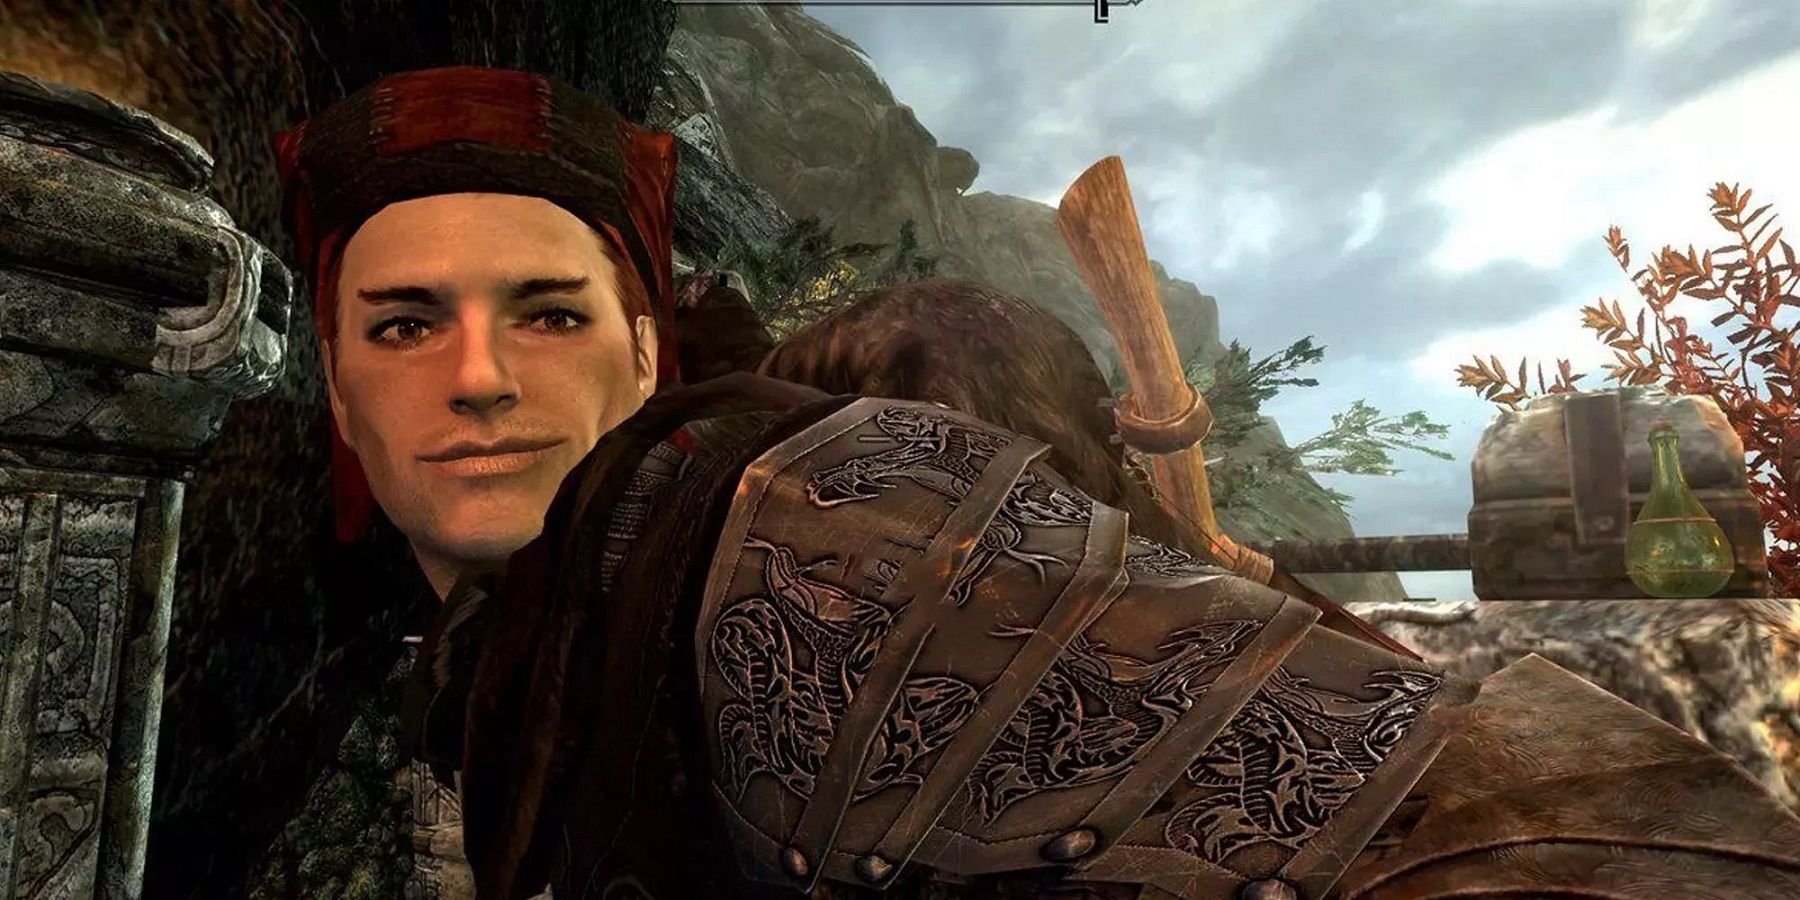 Image from The Elder Scrolls 5: Skyrim showing a more handsome version of The Darkbrotherhood's Cicero.